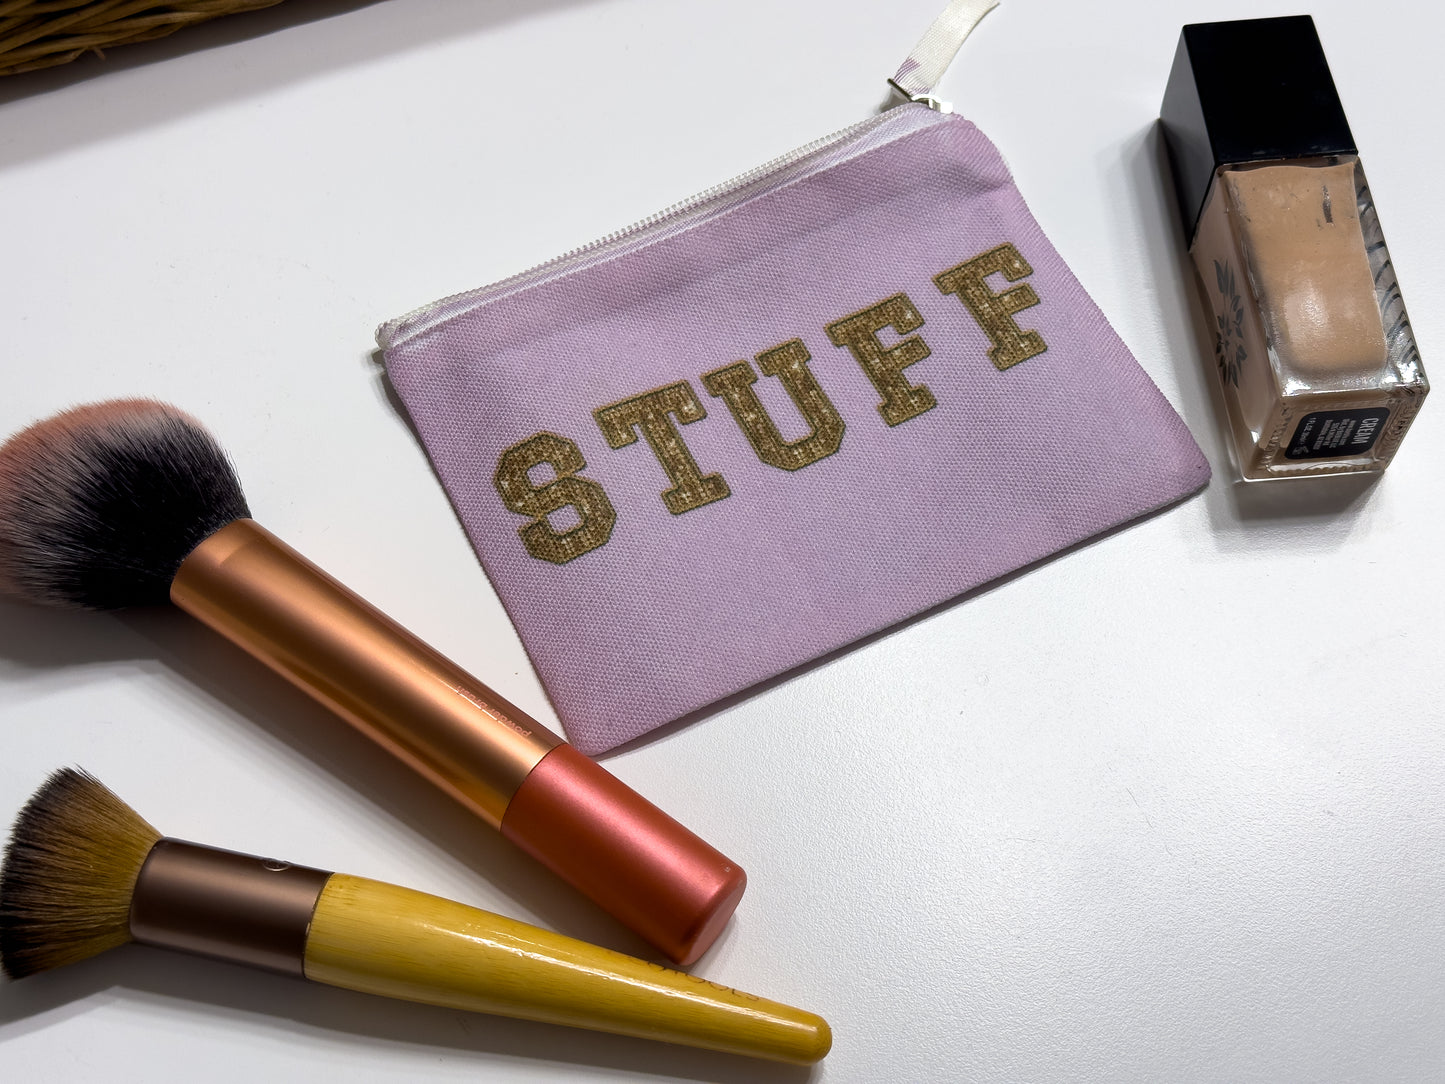 Stuff Pouch | Great for Makeup, Hair Care, Skincare, etc.